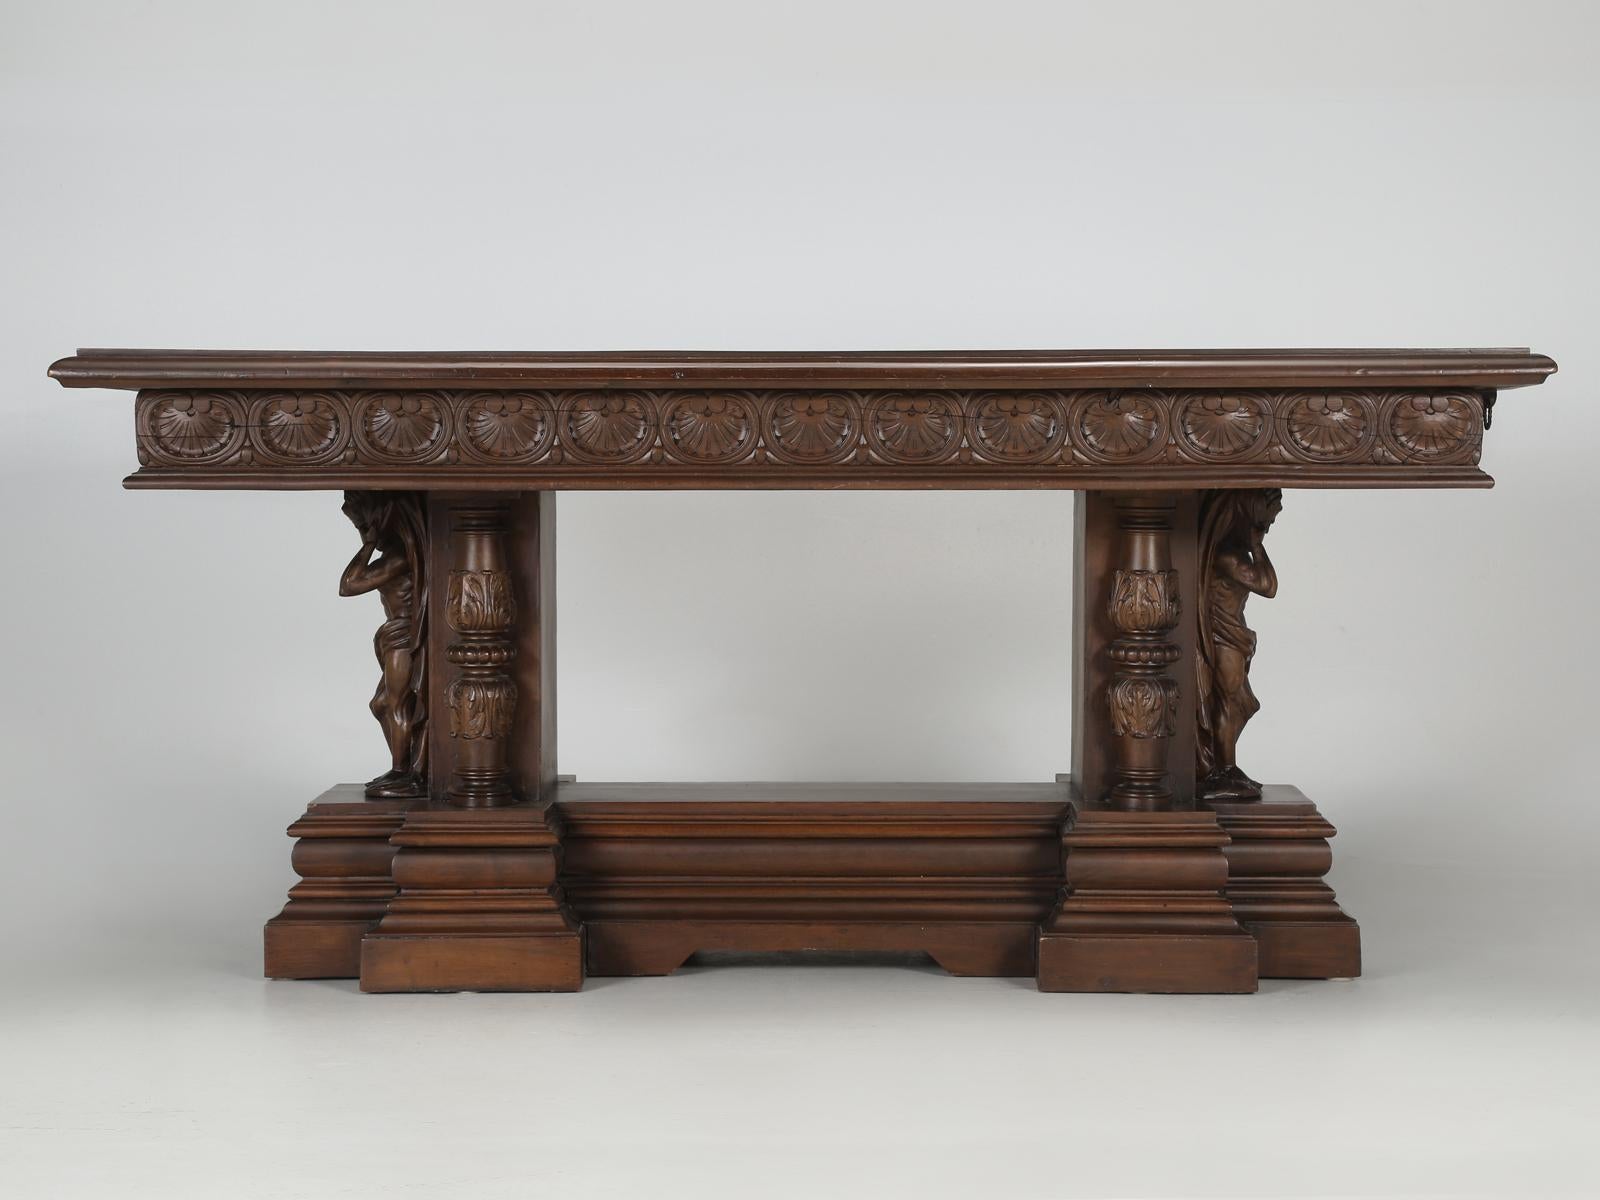 Antique English carved mahogany library table, or since it has built in steel-lopers that pull-out from each end, one could use this antique English library table as a dining room table or very large desk. The surface of the mahogany does have many